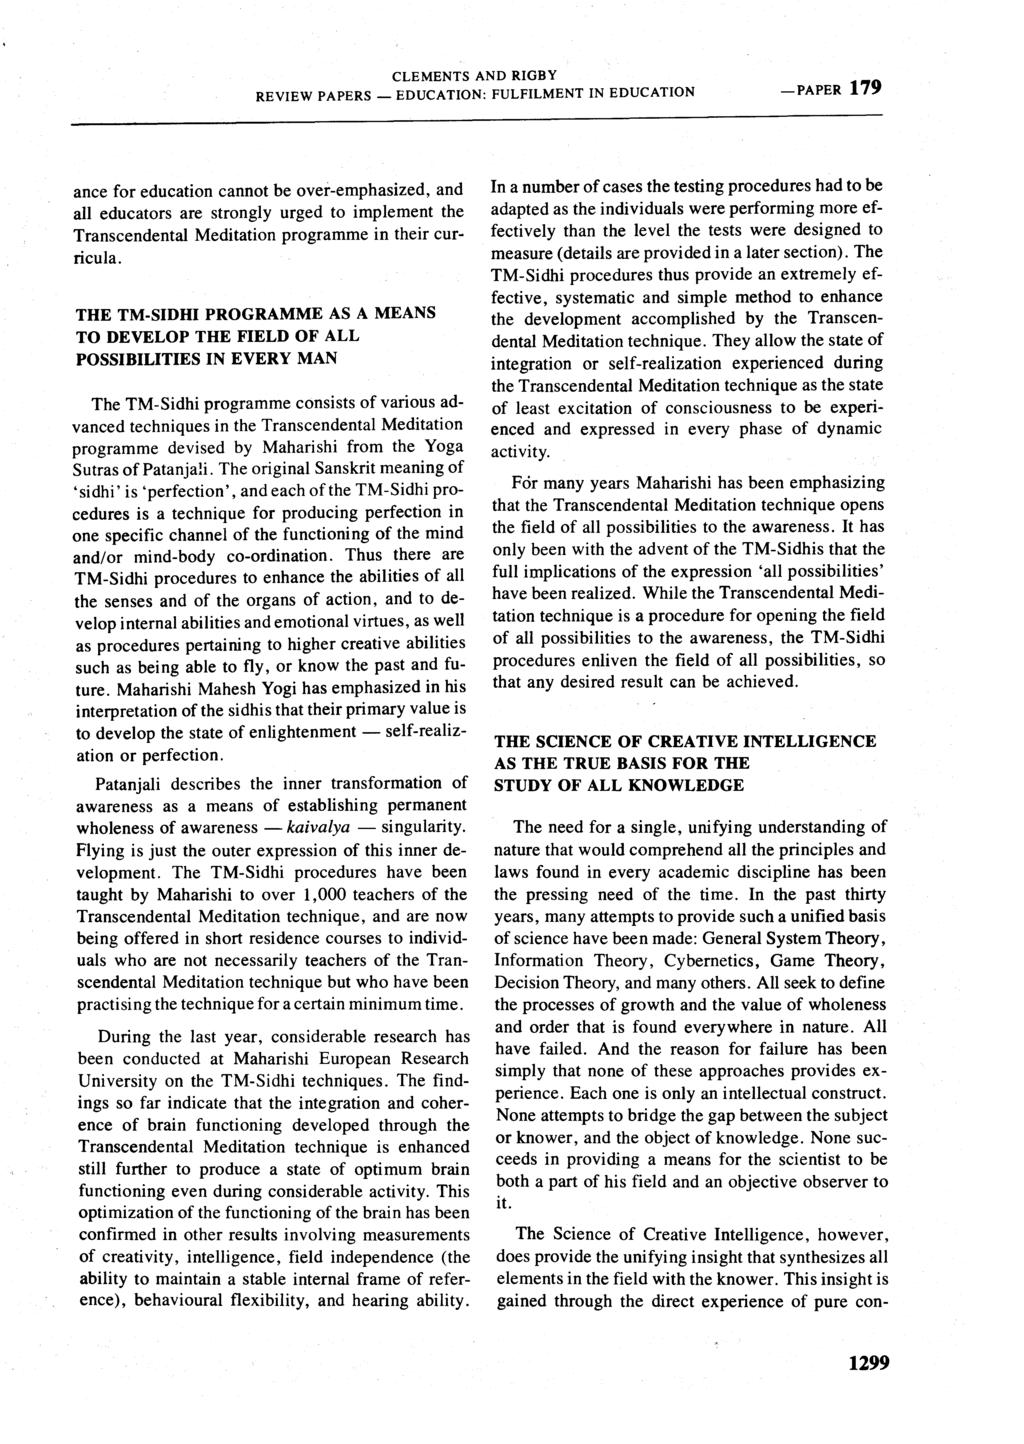 CLEMENTS AND RIGBY REVIEW PAPERS- EDUCATION: FULFILMENT IN EDUCATION -PAPER 179 ance for education cannot be over-emphasized, and all educators are strongly urged to implement the Transcendental